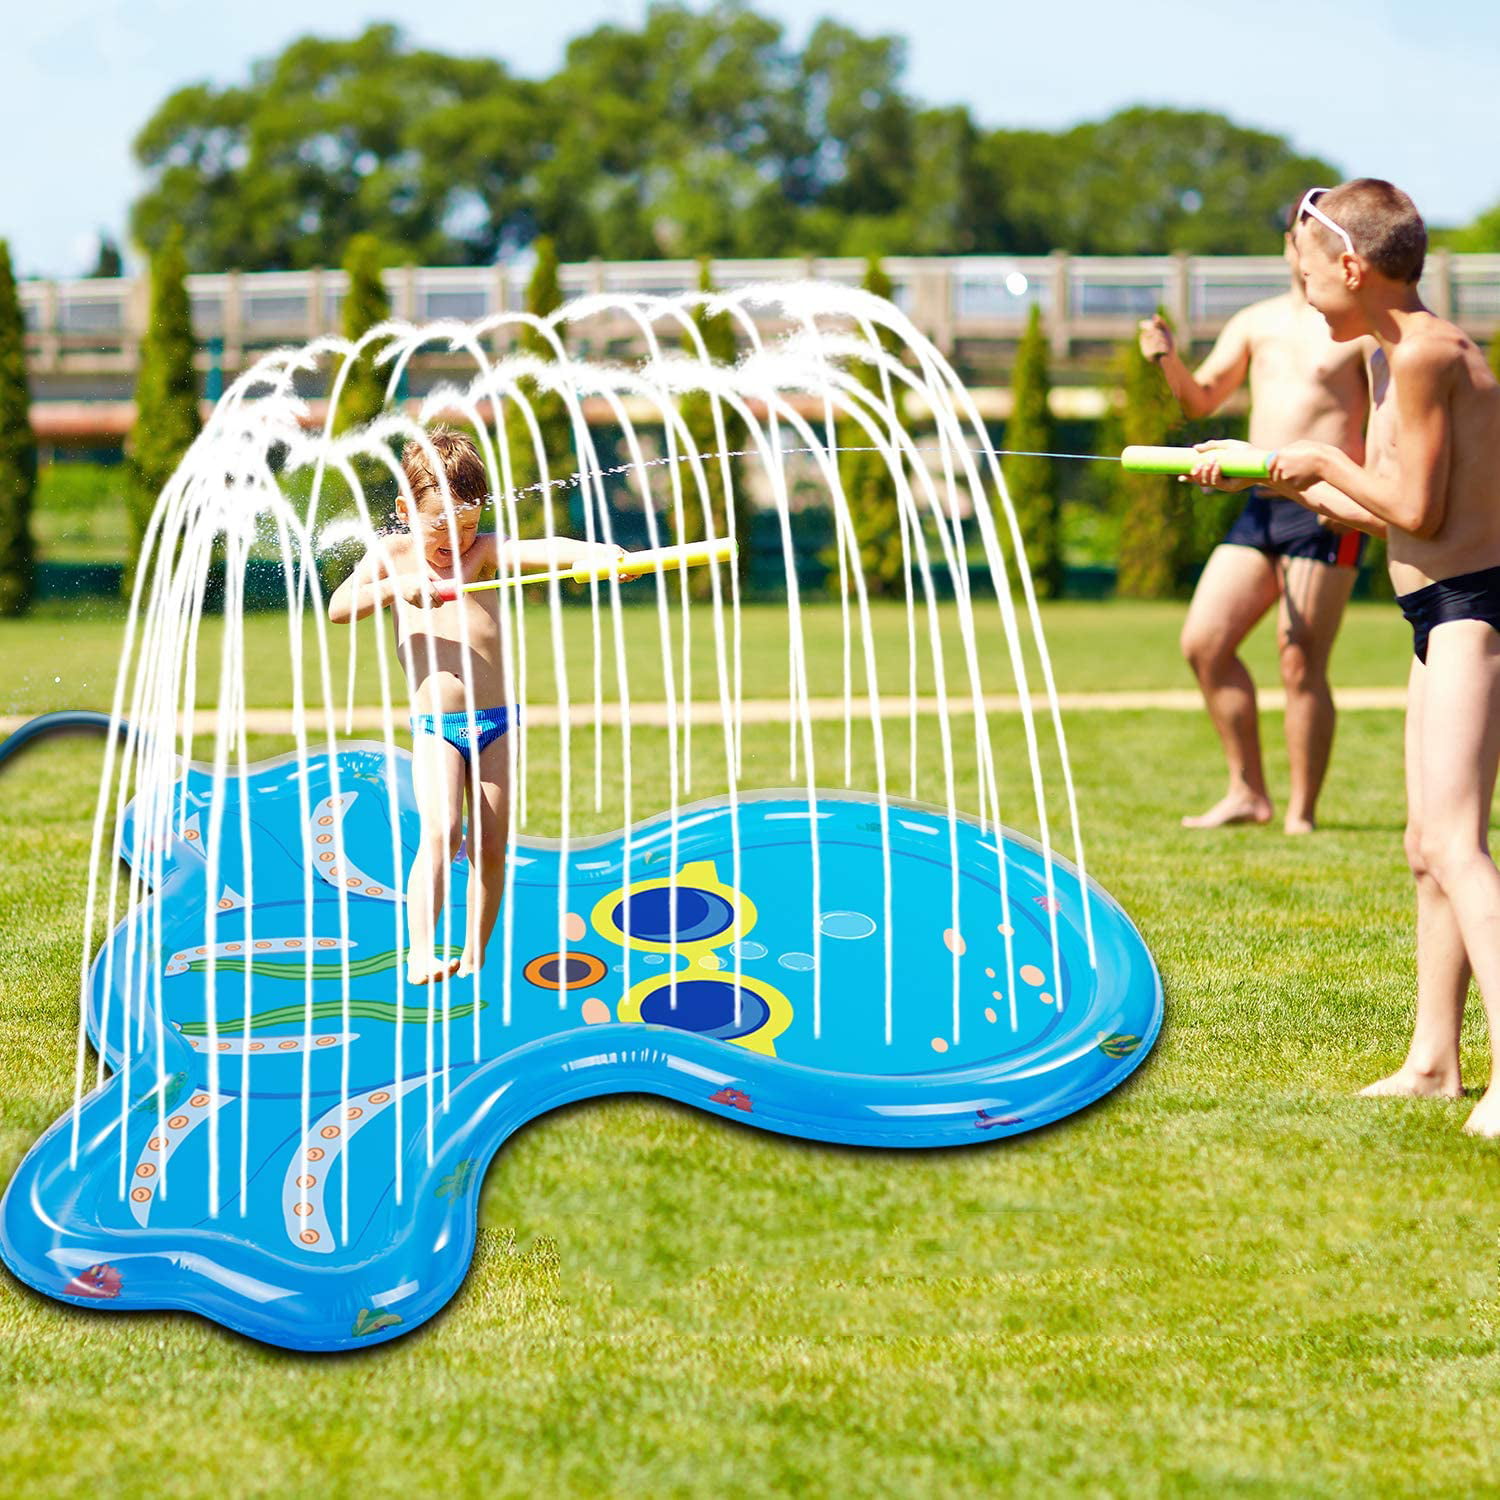 Blue BATTOP Splash Play Mat 68in-Diameter Outdoor Water Play Sprinklers Summer Fun Backyard Play for Infants Toddlers and Kids